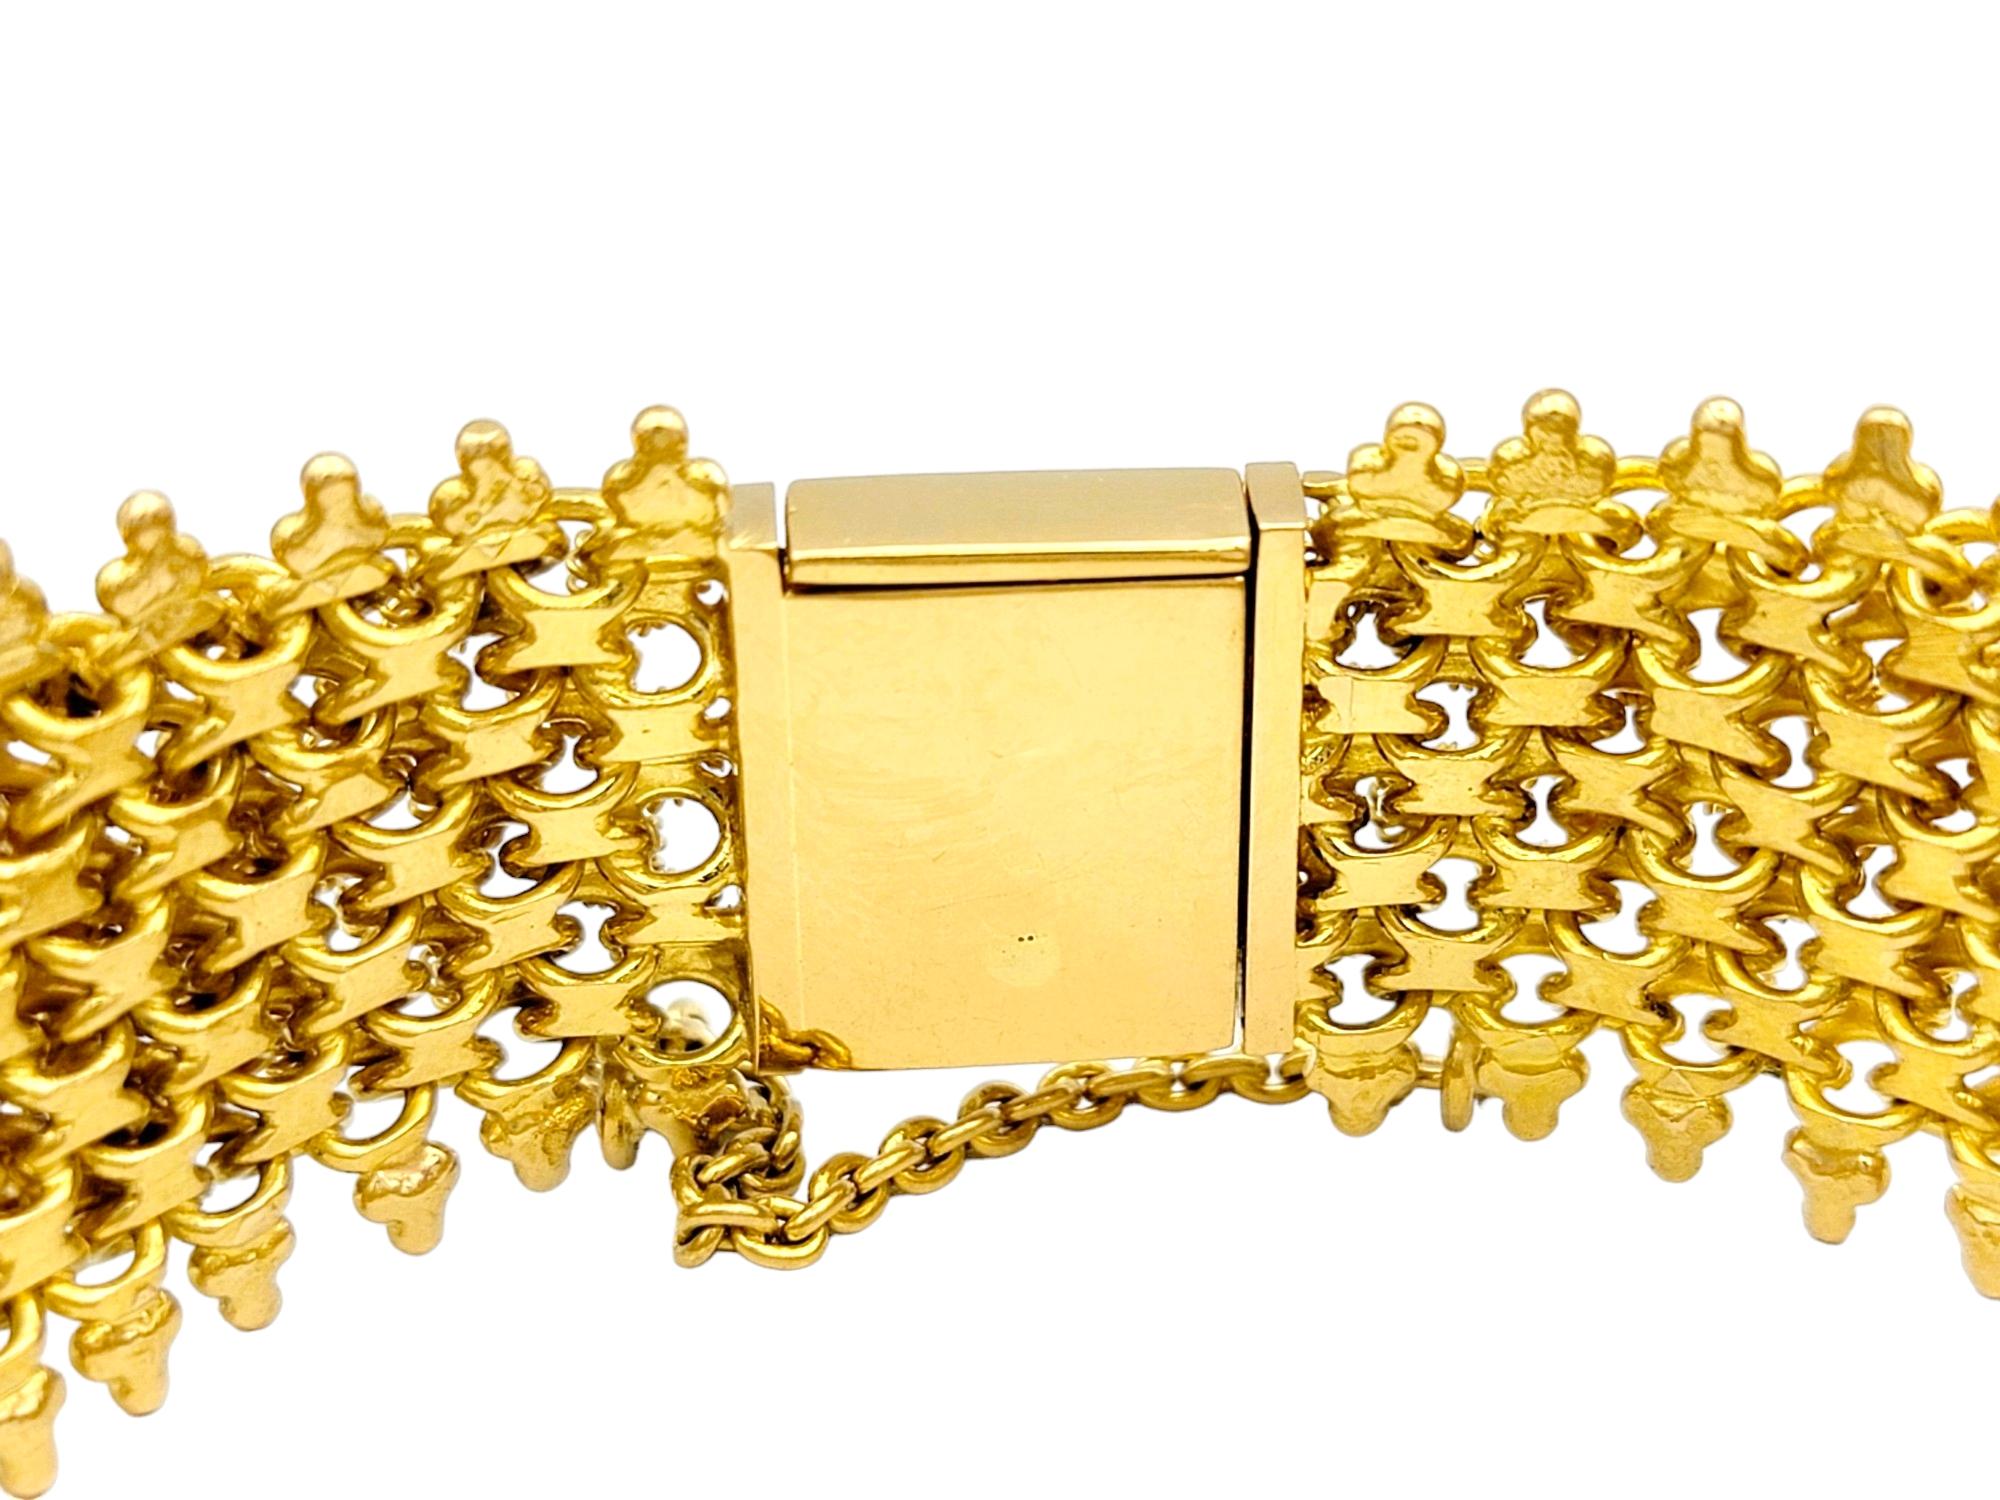 Contemporary 22 Karat Yellow Gold Flexible Cuff Style Bracelet with Granulated Design  For Sale